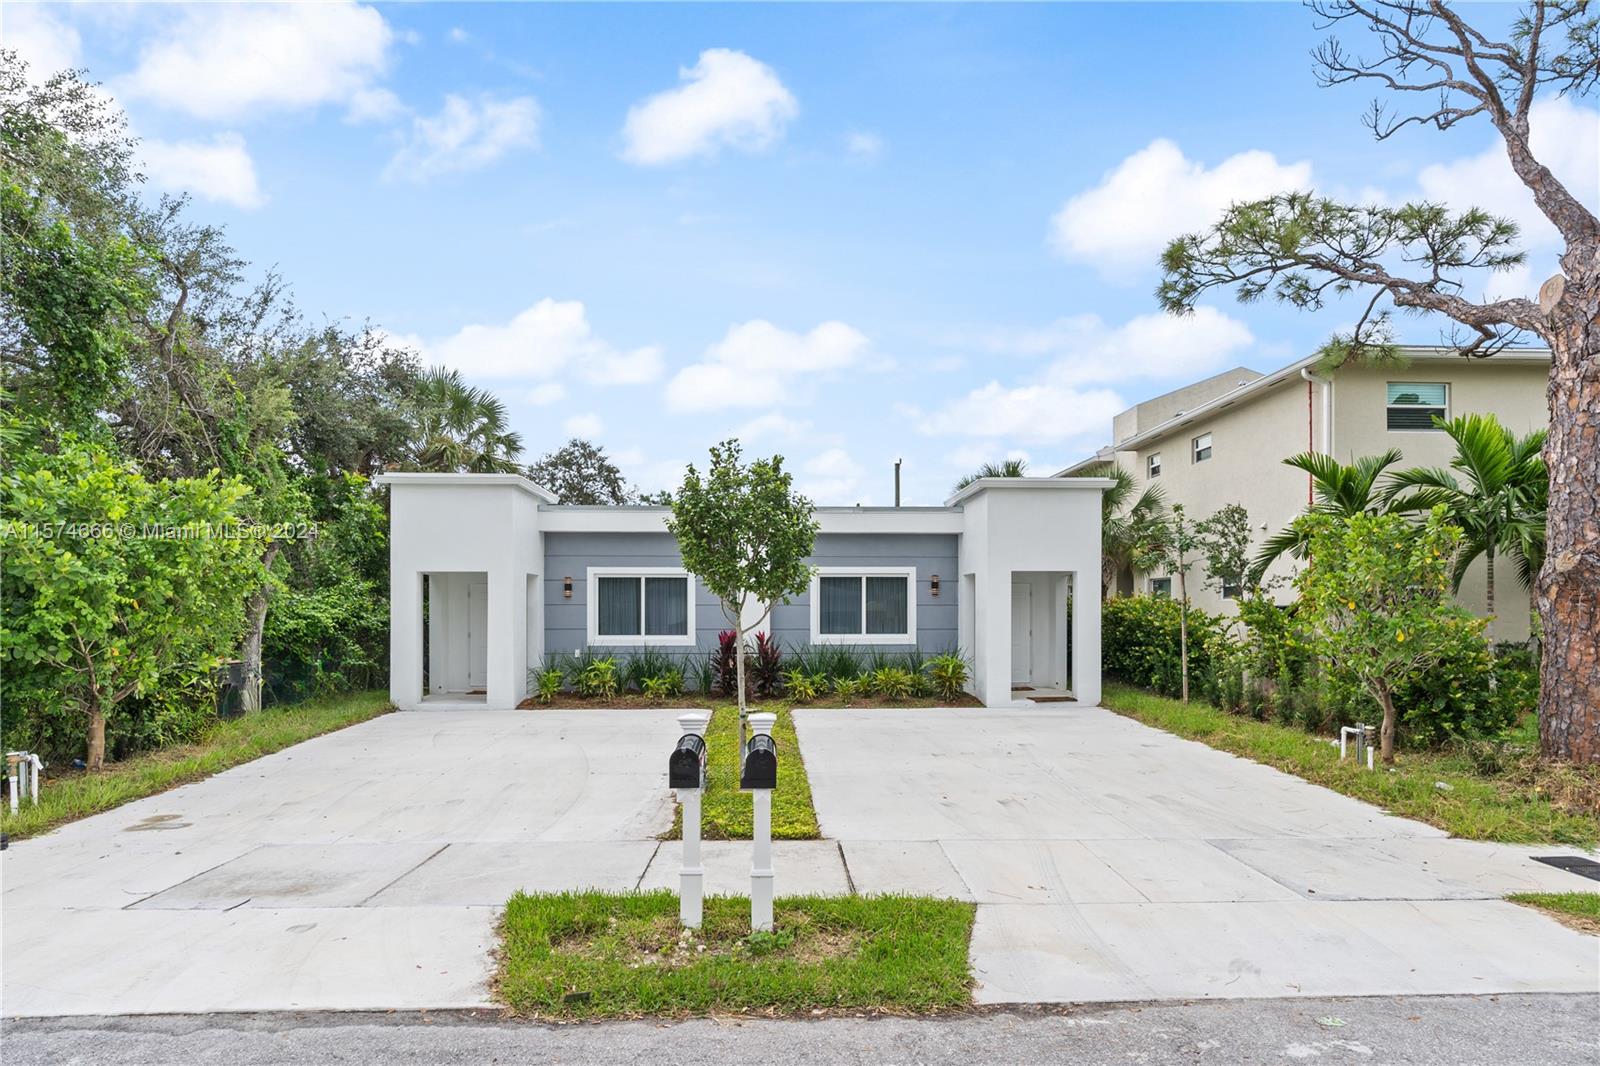 Rental Property at 1133 Nw 2nd St St, Fort Lauderdale, Broward County, Florida -  - $1,100,000 MO.